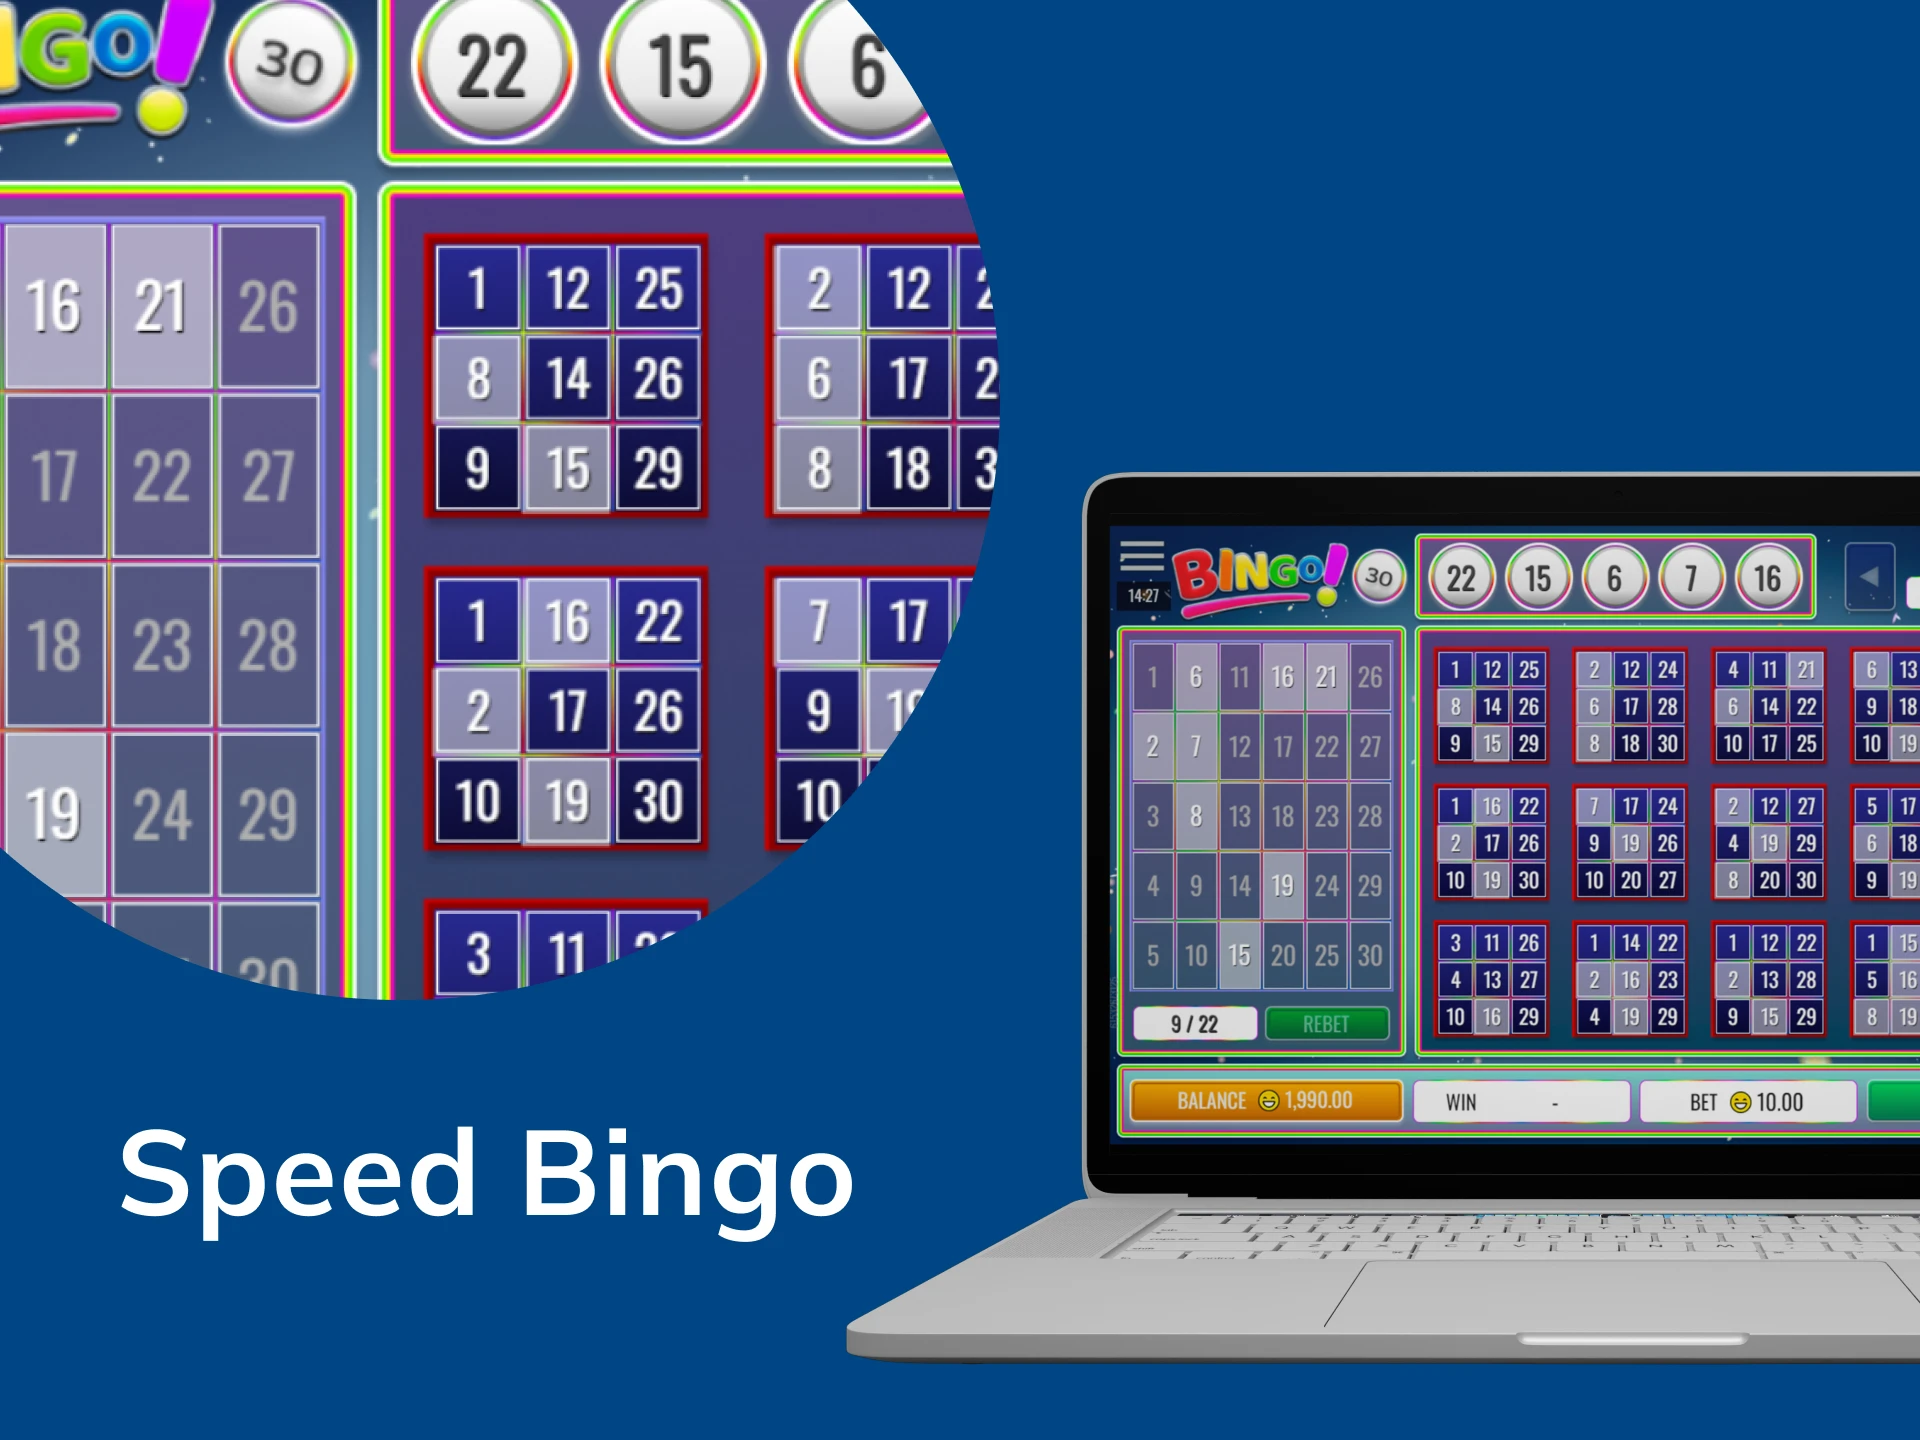 If you like a fast games, try speed bingo.